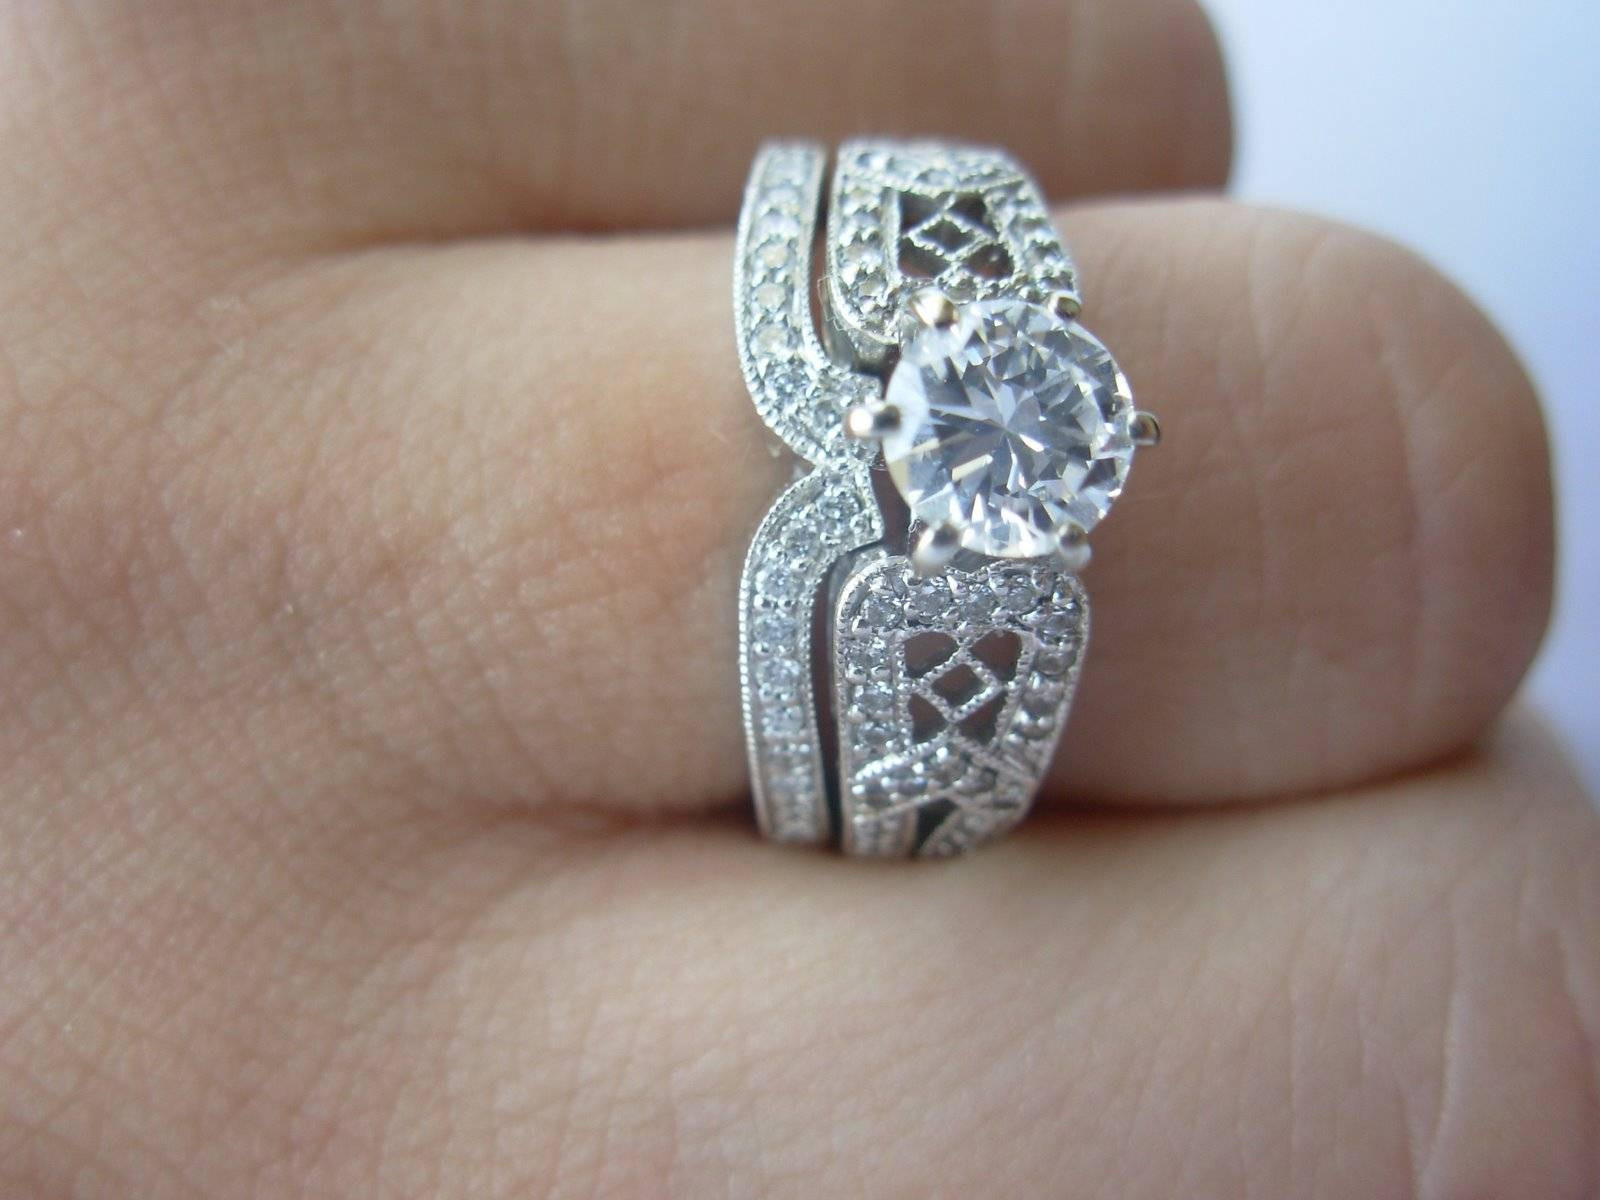 Wedding Bands And Engagement Rings
 15 Best Collection of Interlocking Engagement Rings And